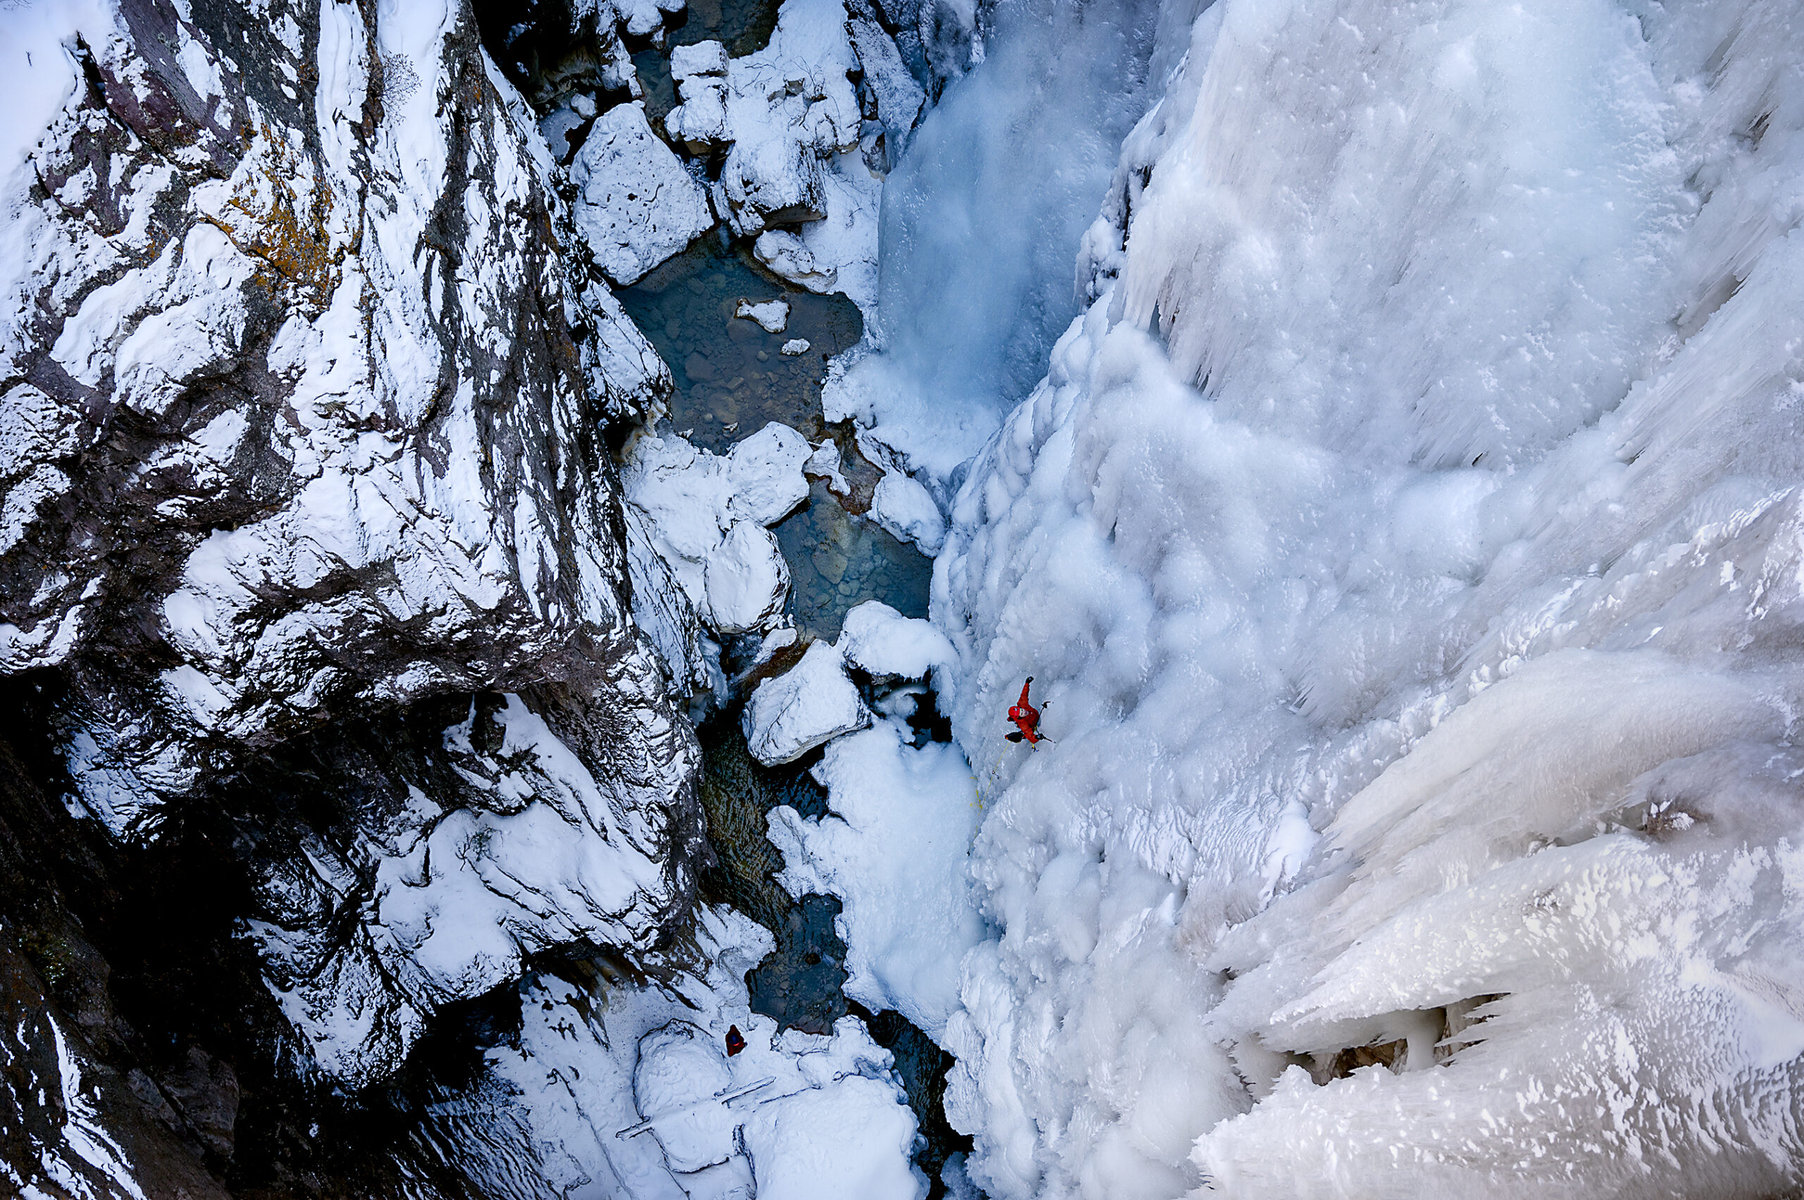 A climber at the Ouray Ice park with a deep ravine below.